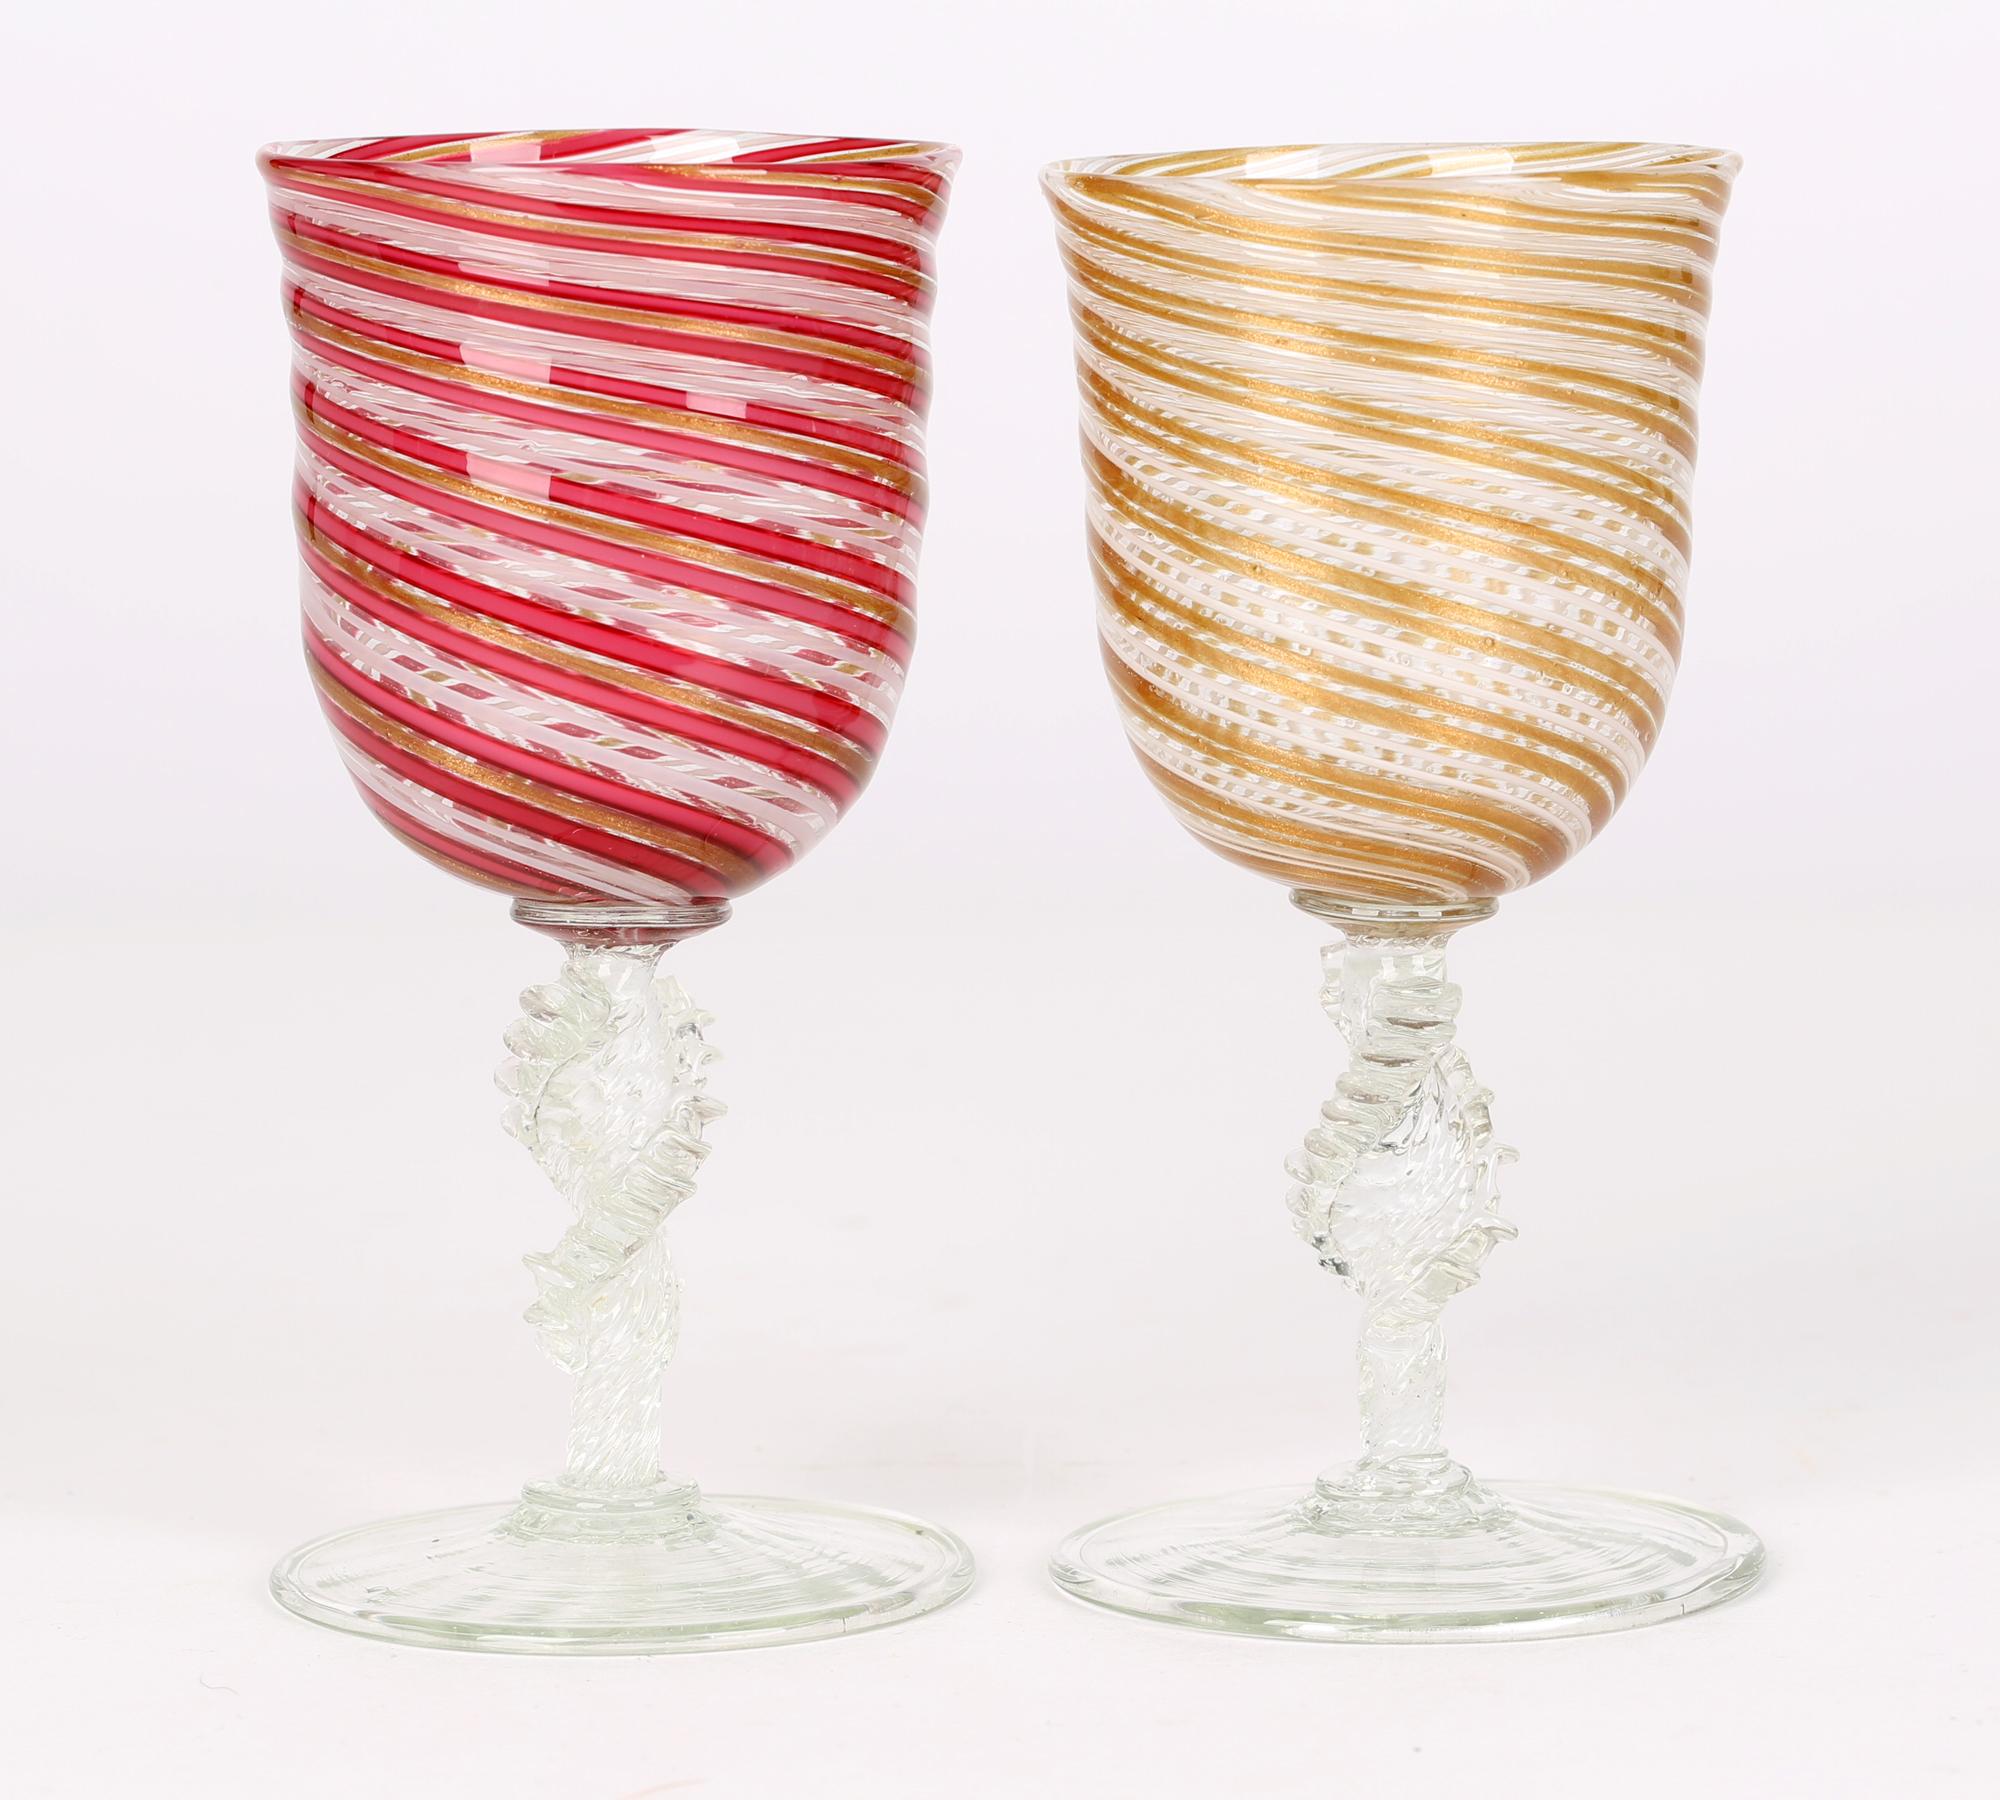 Hand-Crafted Salviati & Co Pair Mezza Filigrana Wine Glasses on Thorny Stems For Sale